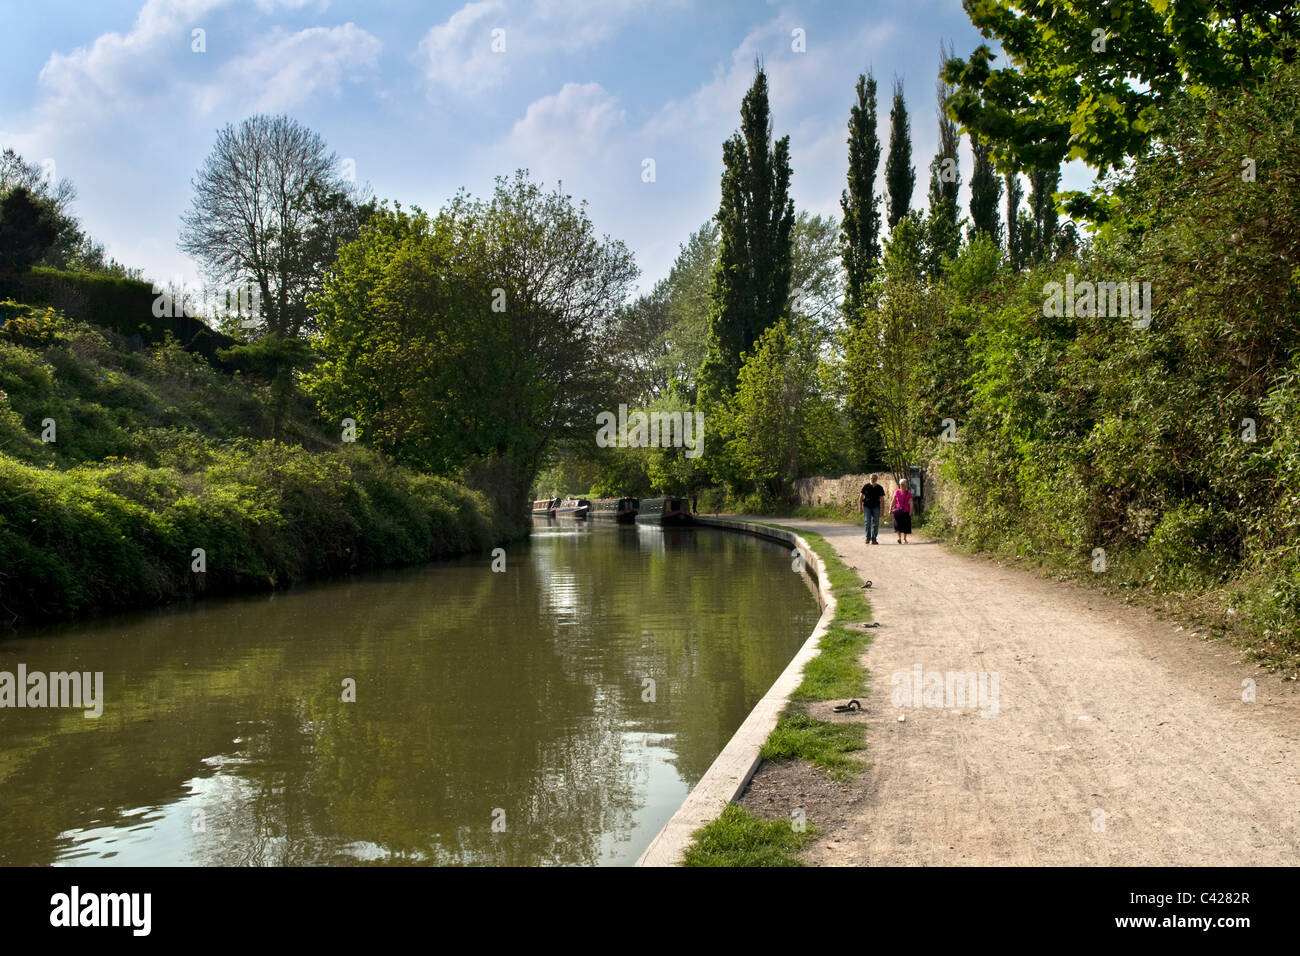 Spring, early summer canal scene on the Kennet and avon canal taken at Bradford on Avon, Wiltshire, England, uk Stock Photo